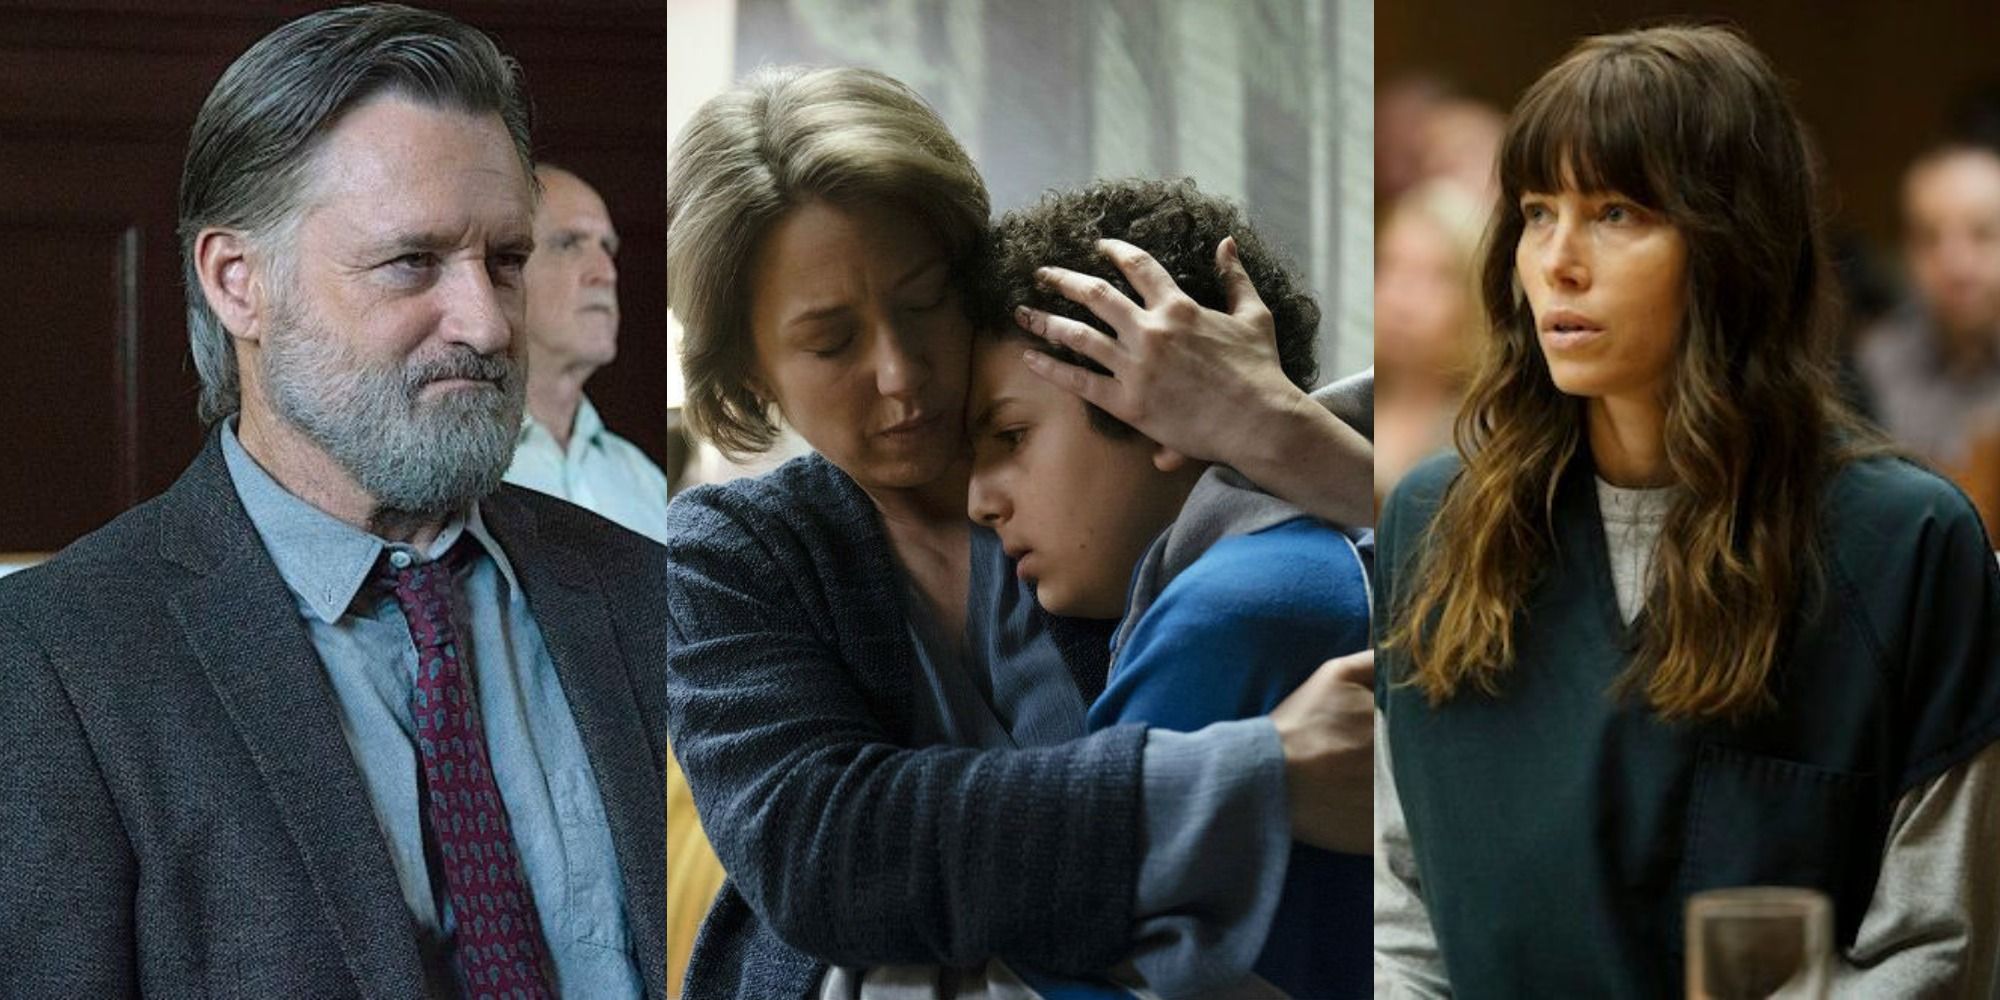 The Sinner: Harry Ambrose, Vera, Julian and Cora ranked by power